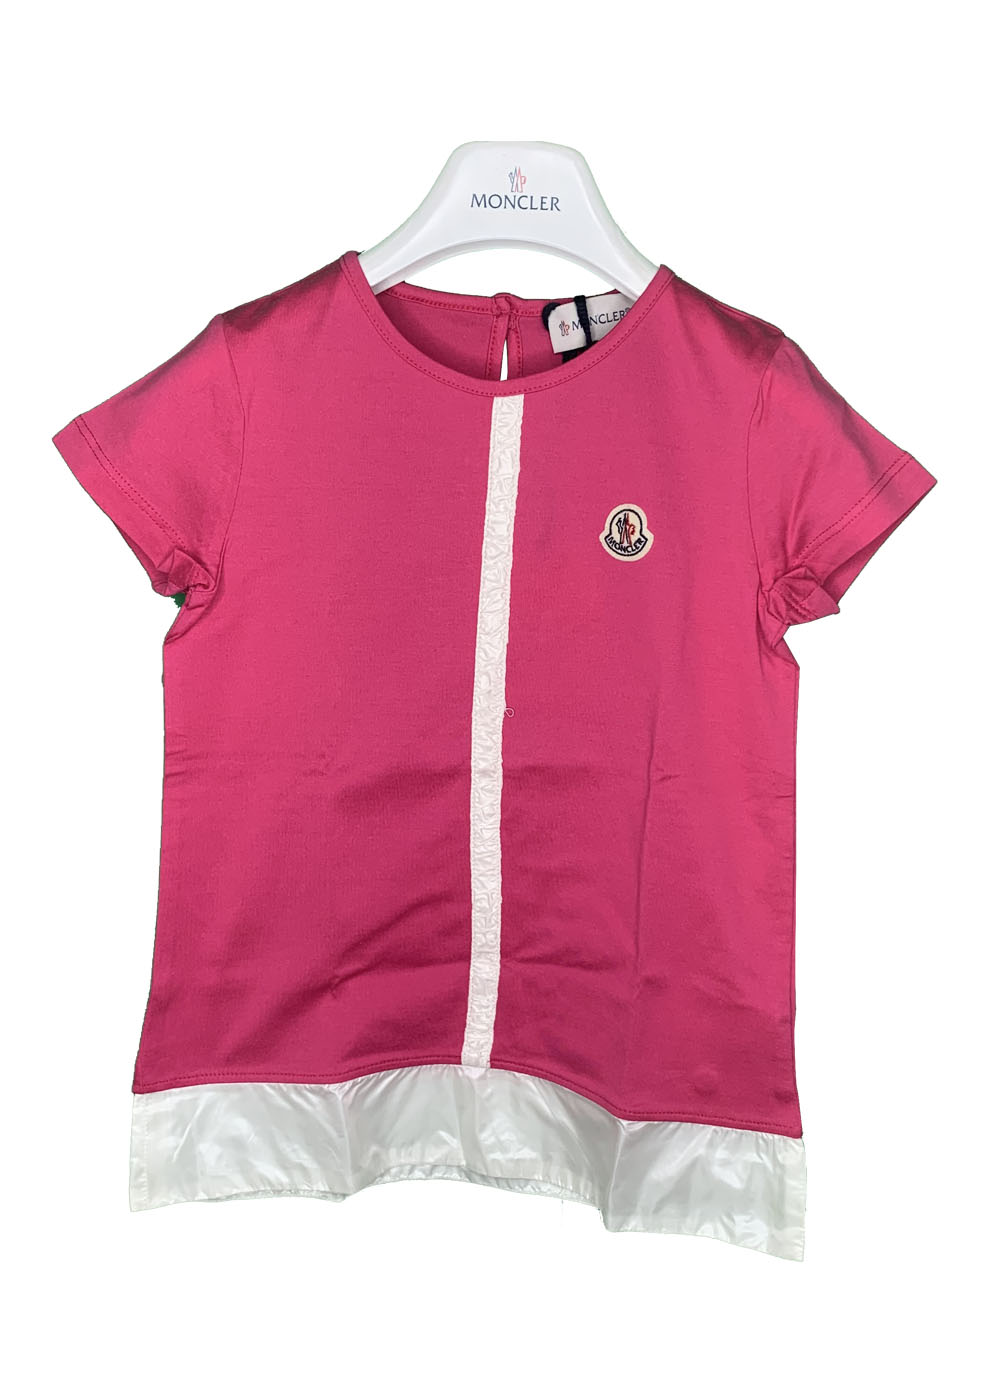 Featured image for “MONCLER T-SHIRT ROSA”